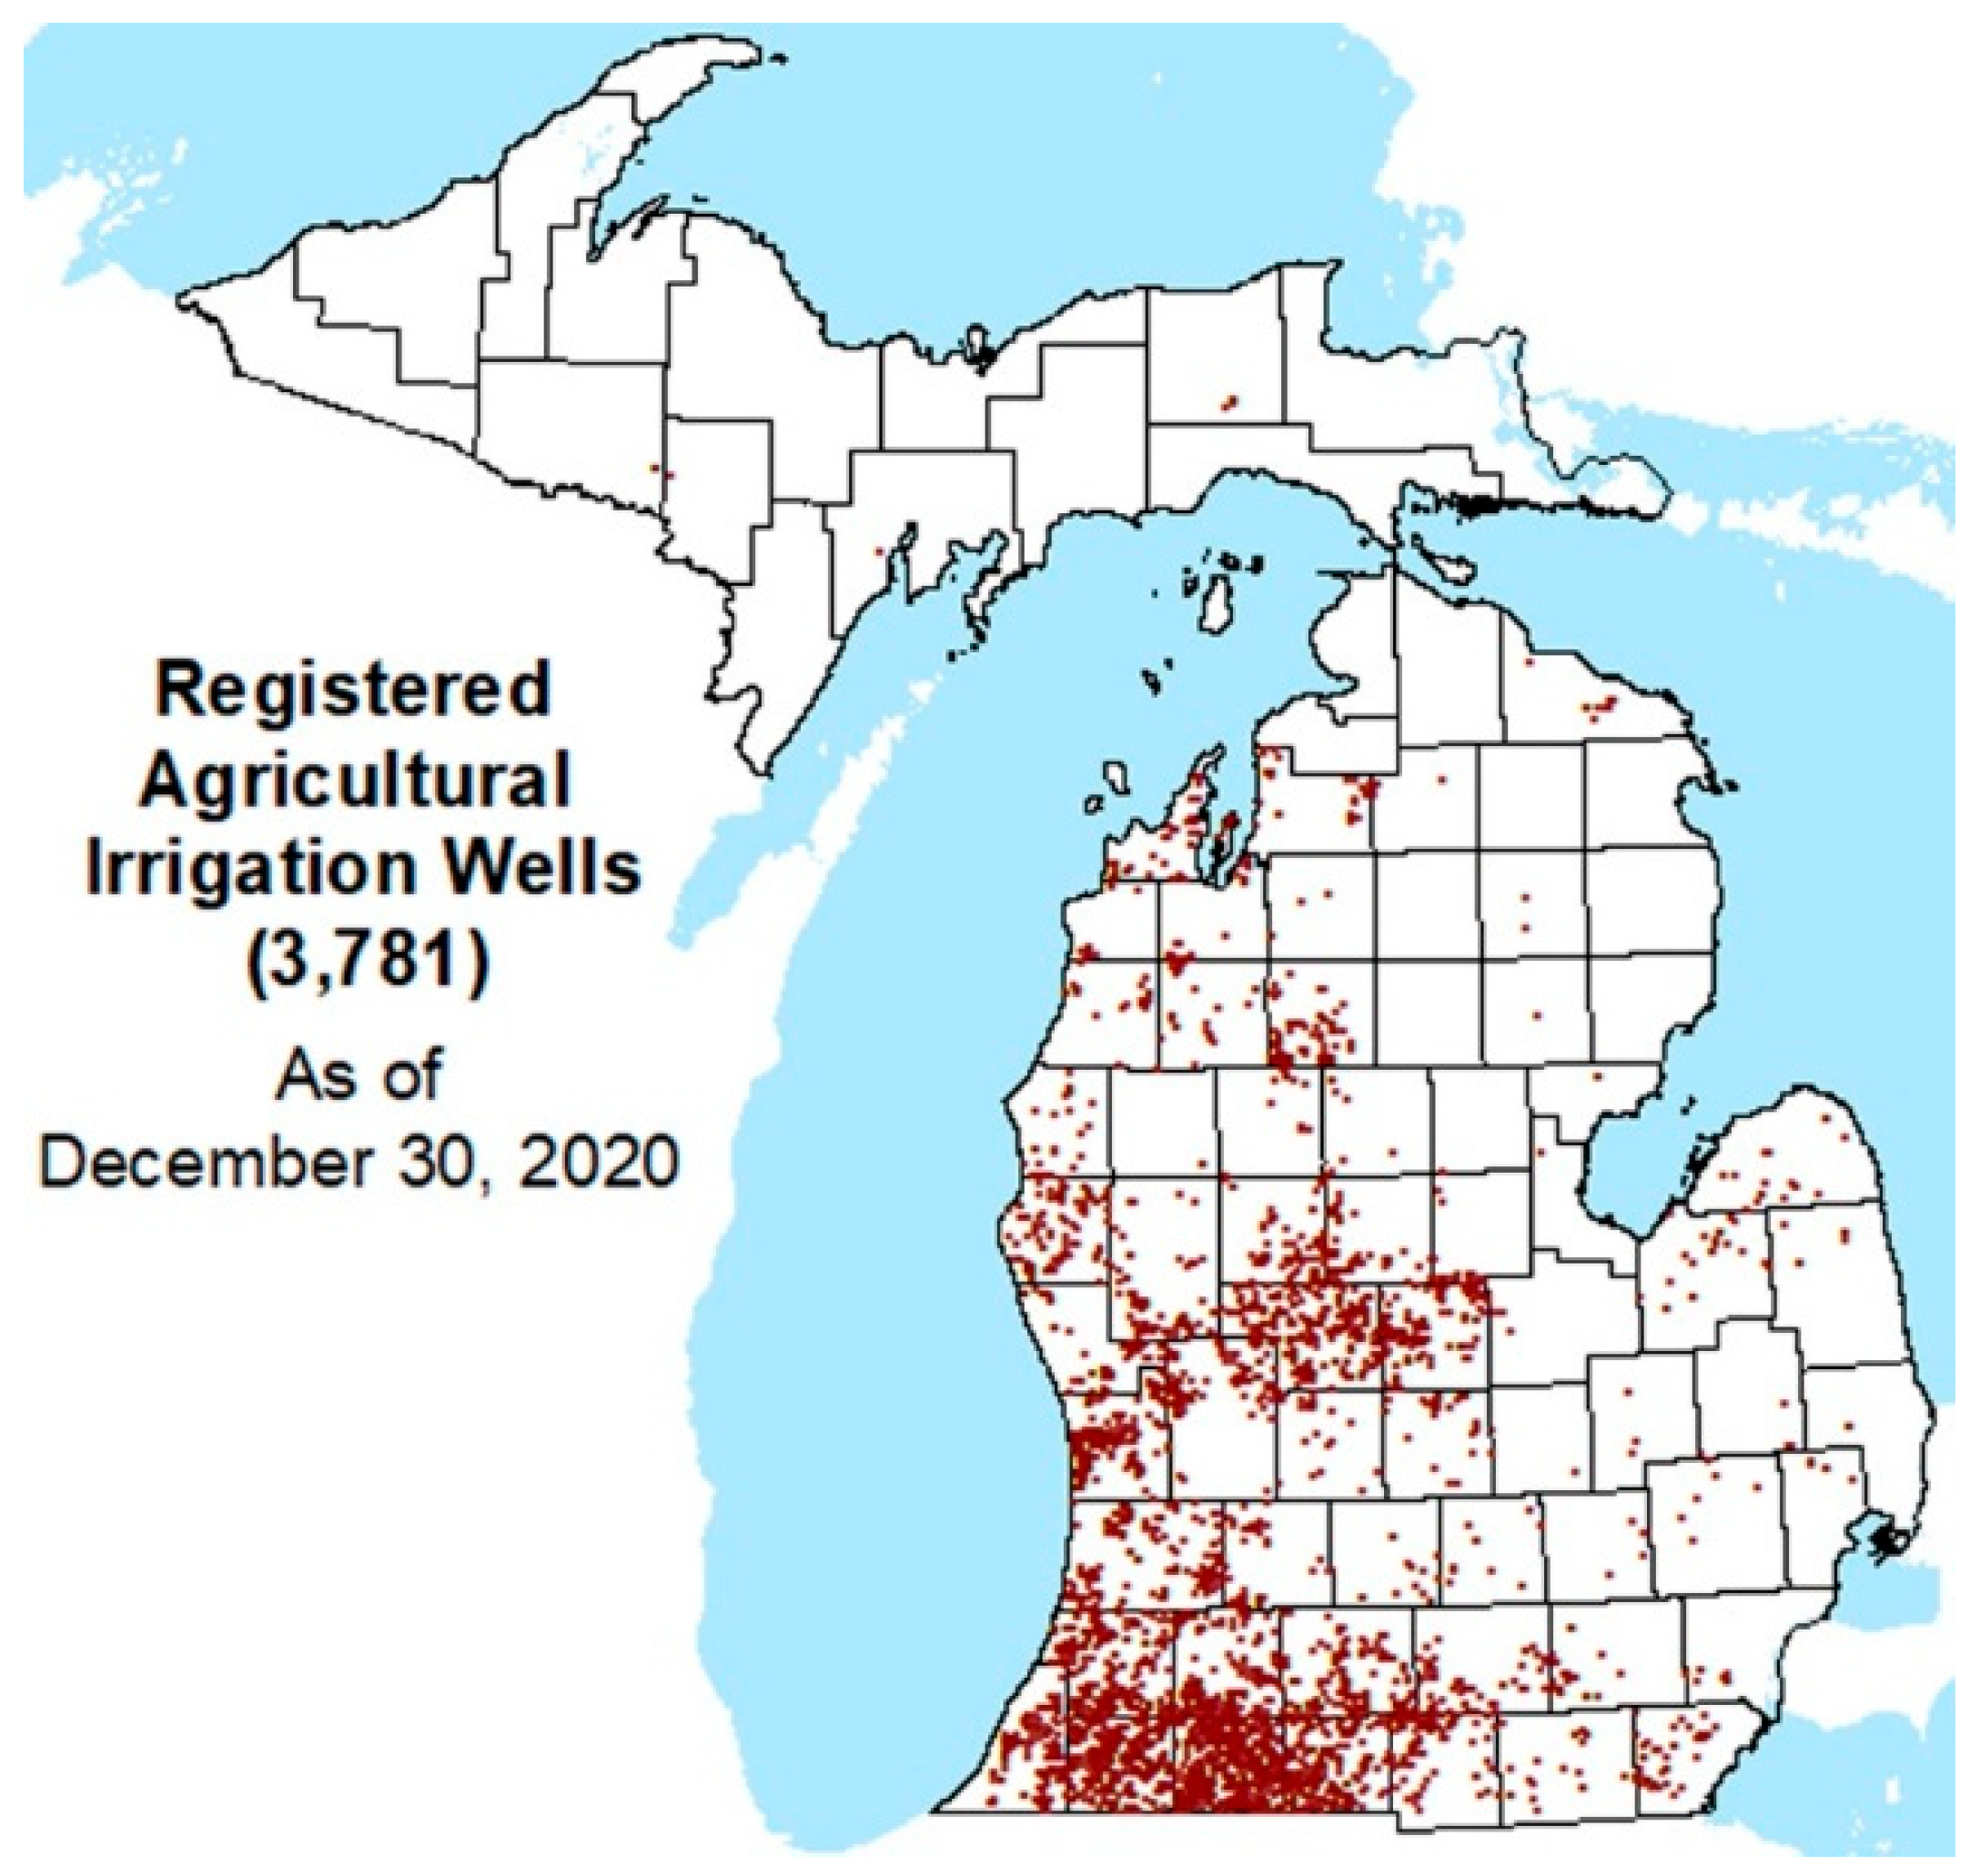 Sustainability | Free Full-Text | Groundwater in Crisis? Addressing  Groundwater Challenges in Michigan (USA) as a Template for the Great Lakes